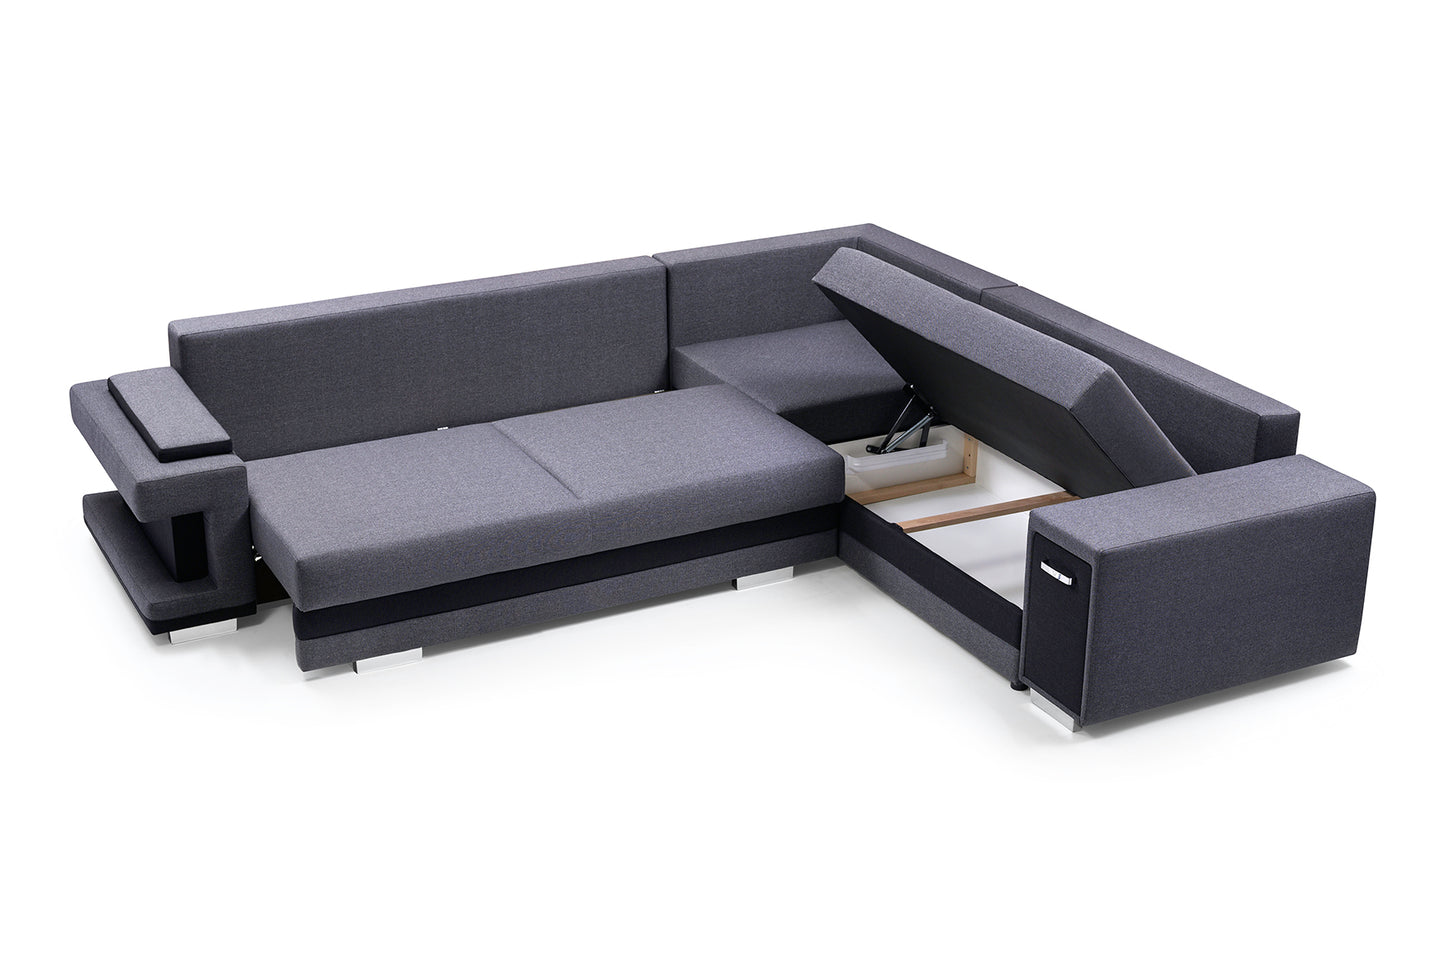 ASTA2 - Functional and modern corner sofa bed with drawer, 2 storages and pull out bed >305x272cm<